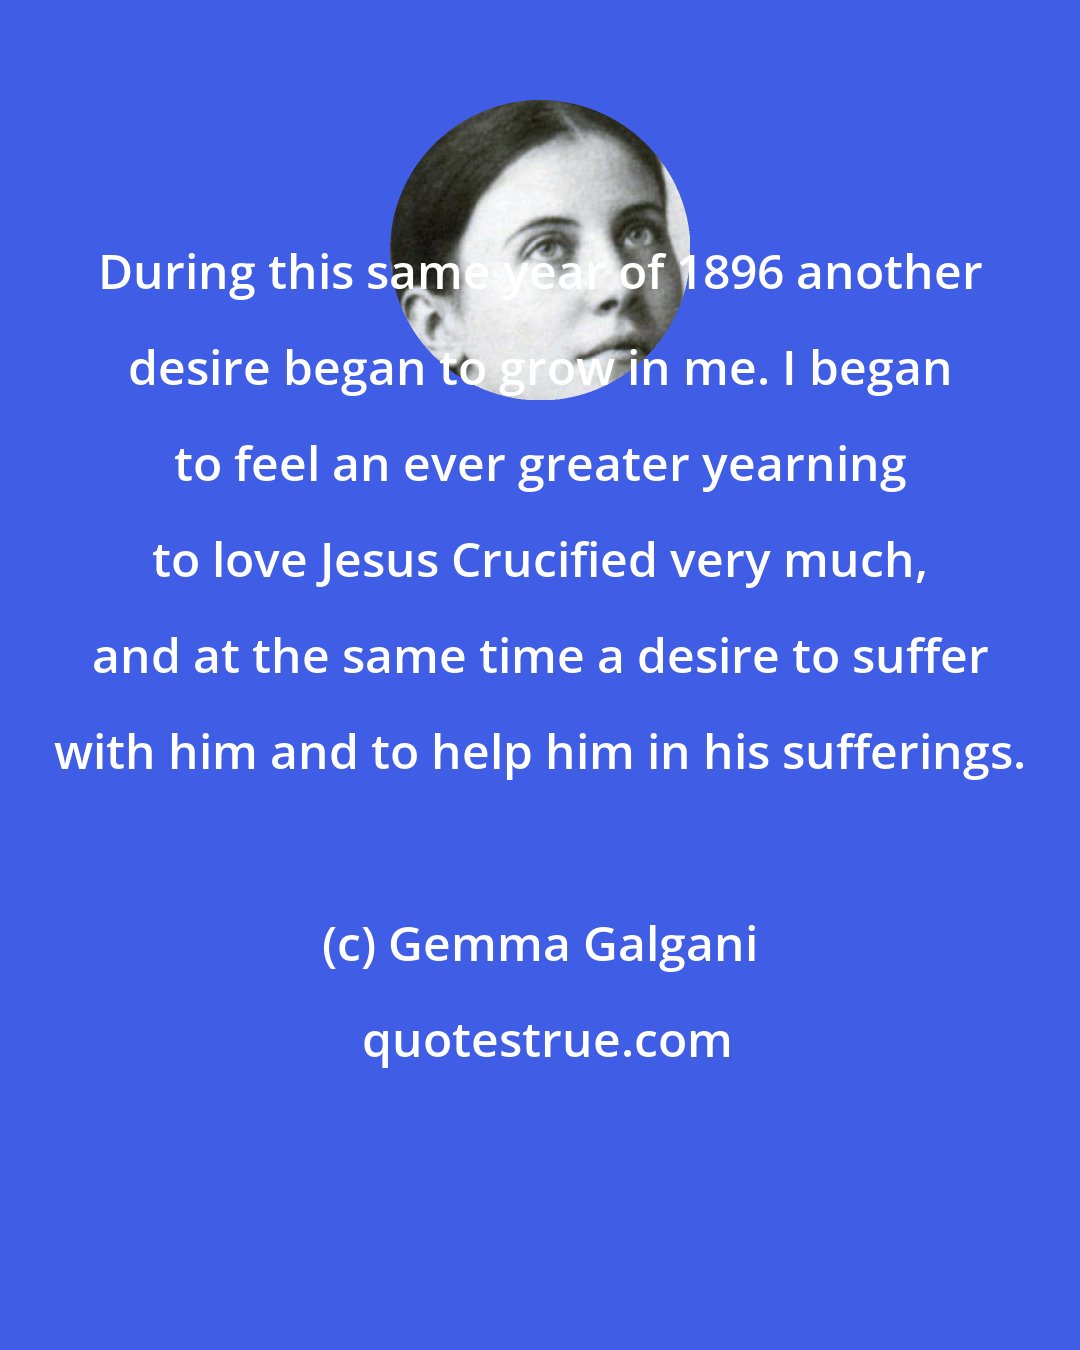 Gemma Galgani: During this same year of 1896 another desire began to grow in me. I began to feel an ever greater yearning to love Jesus Crucified very much, and at the same time a desire to suffer with him and to help him in his sufferings.